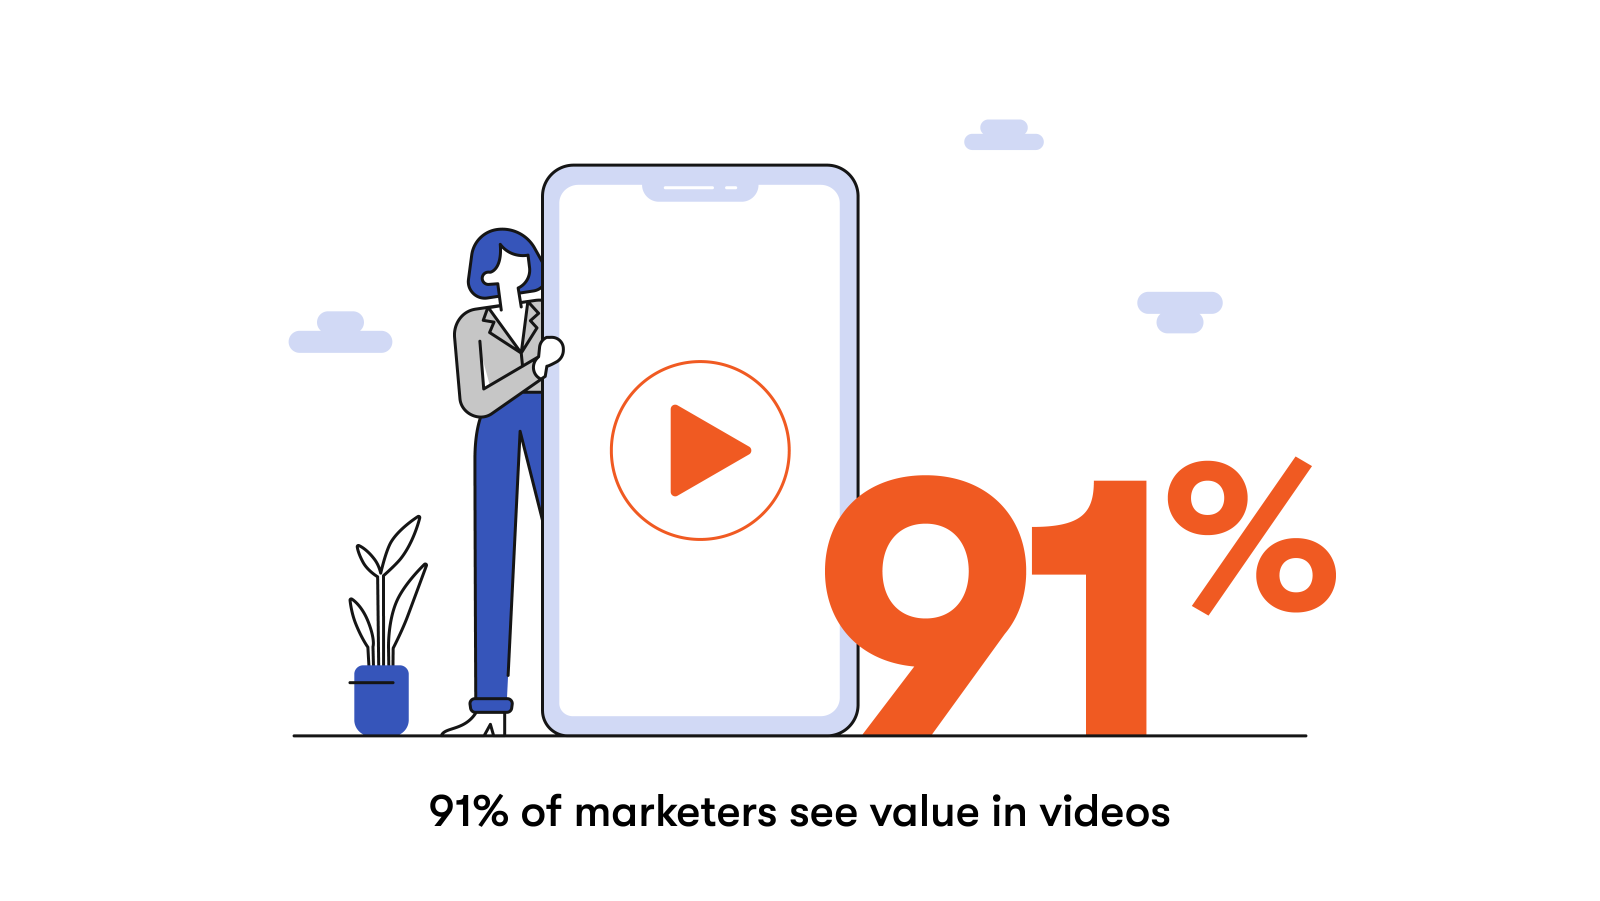 91% of marketers see value in videos